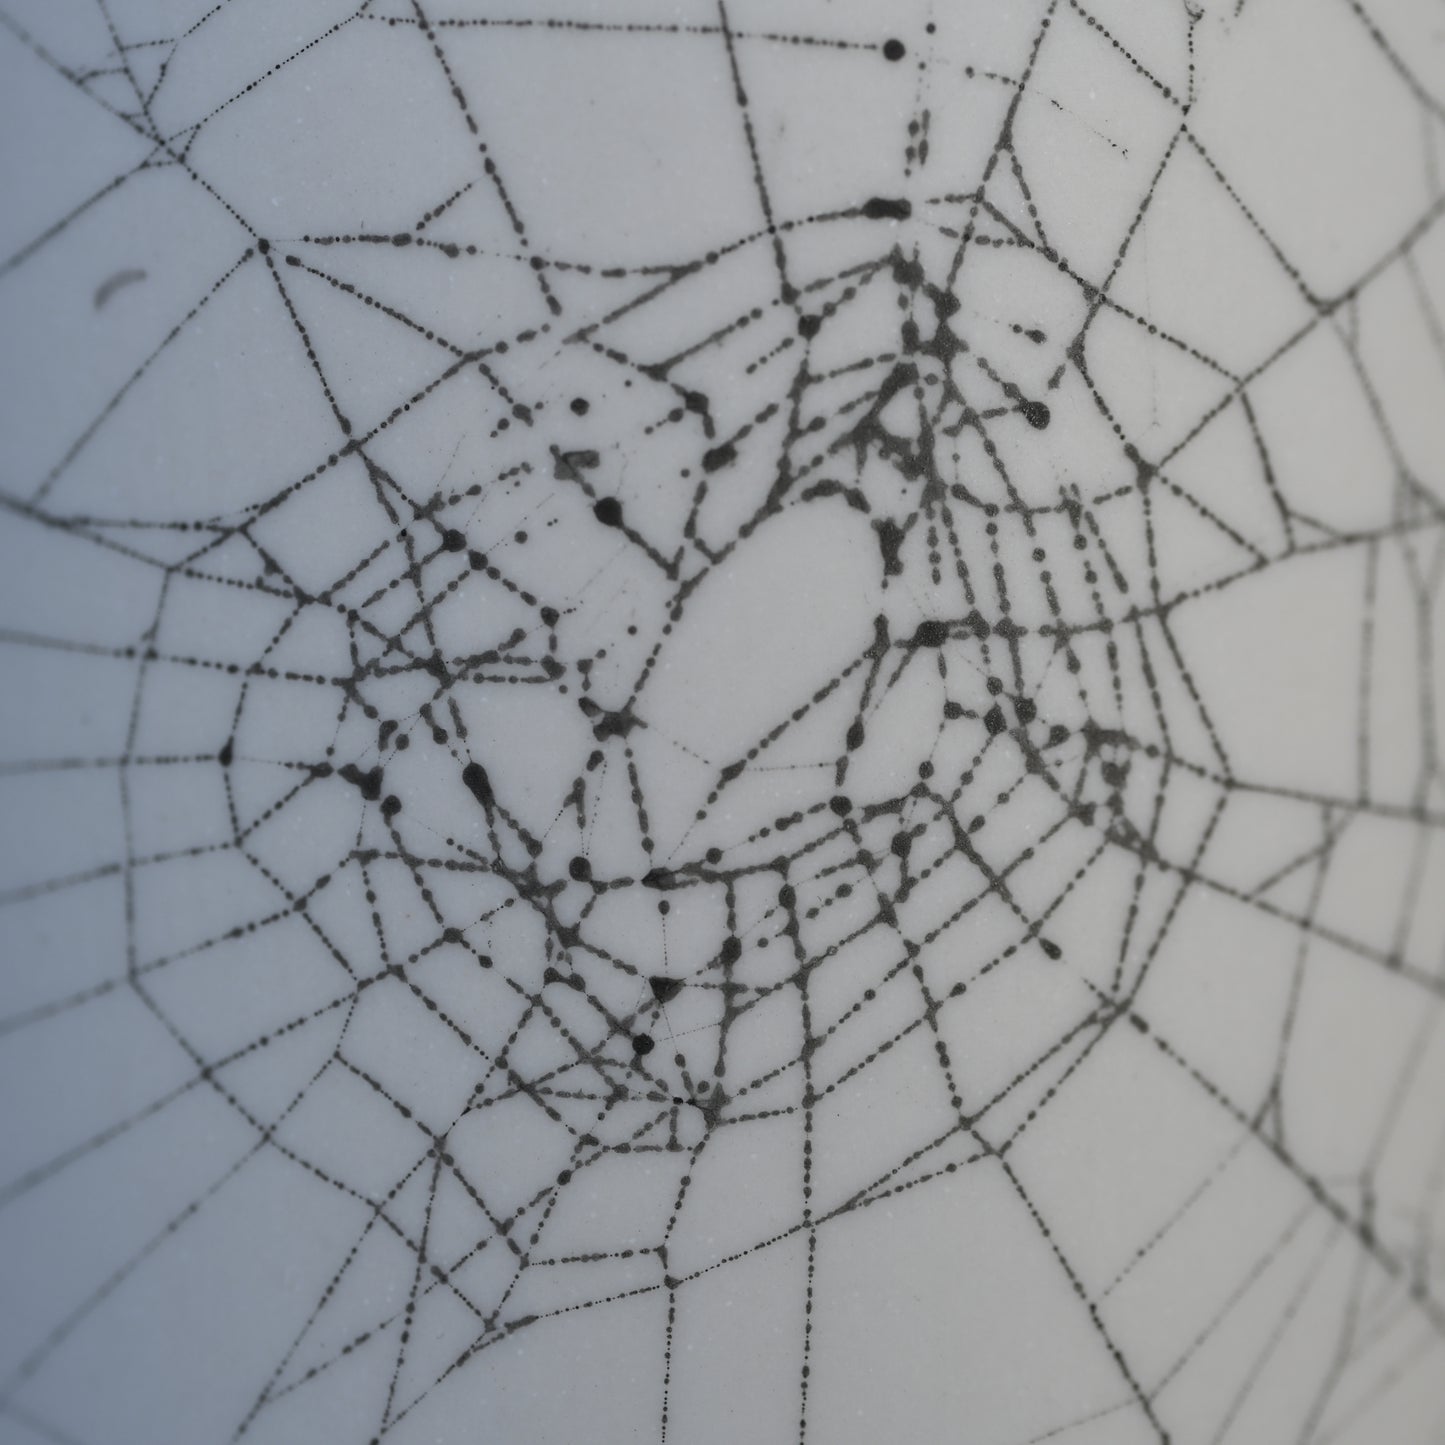 Web on Clay (089), Collected September 05, 2022